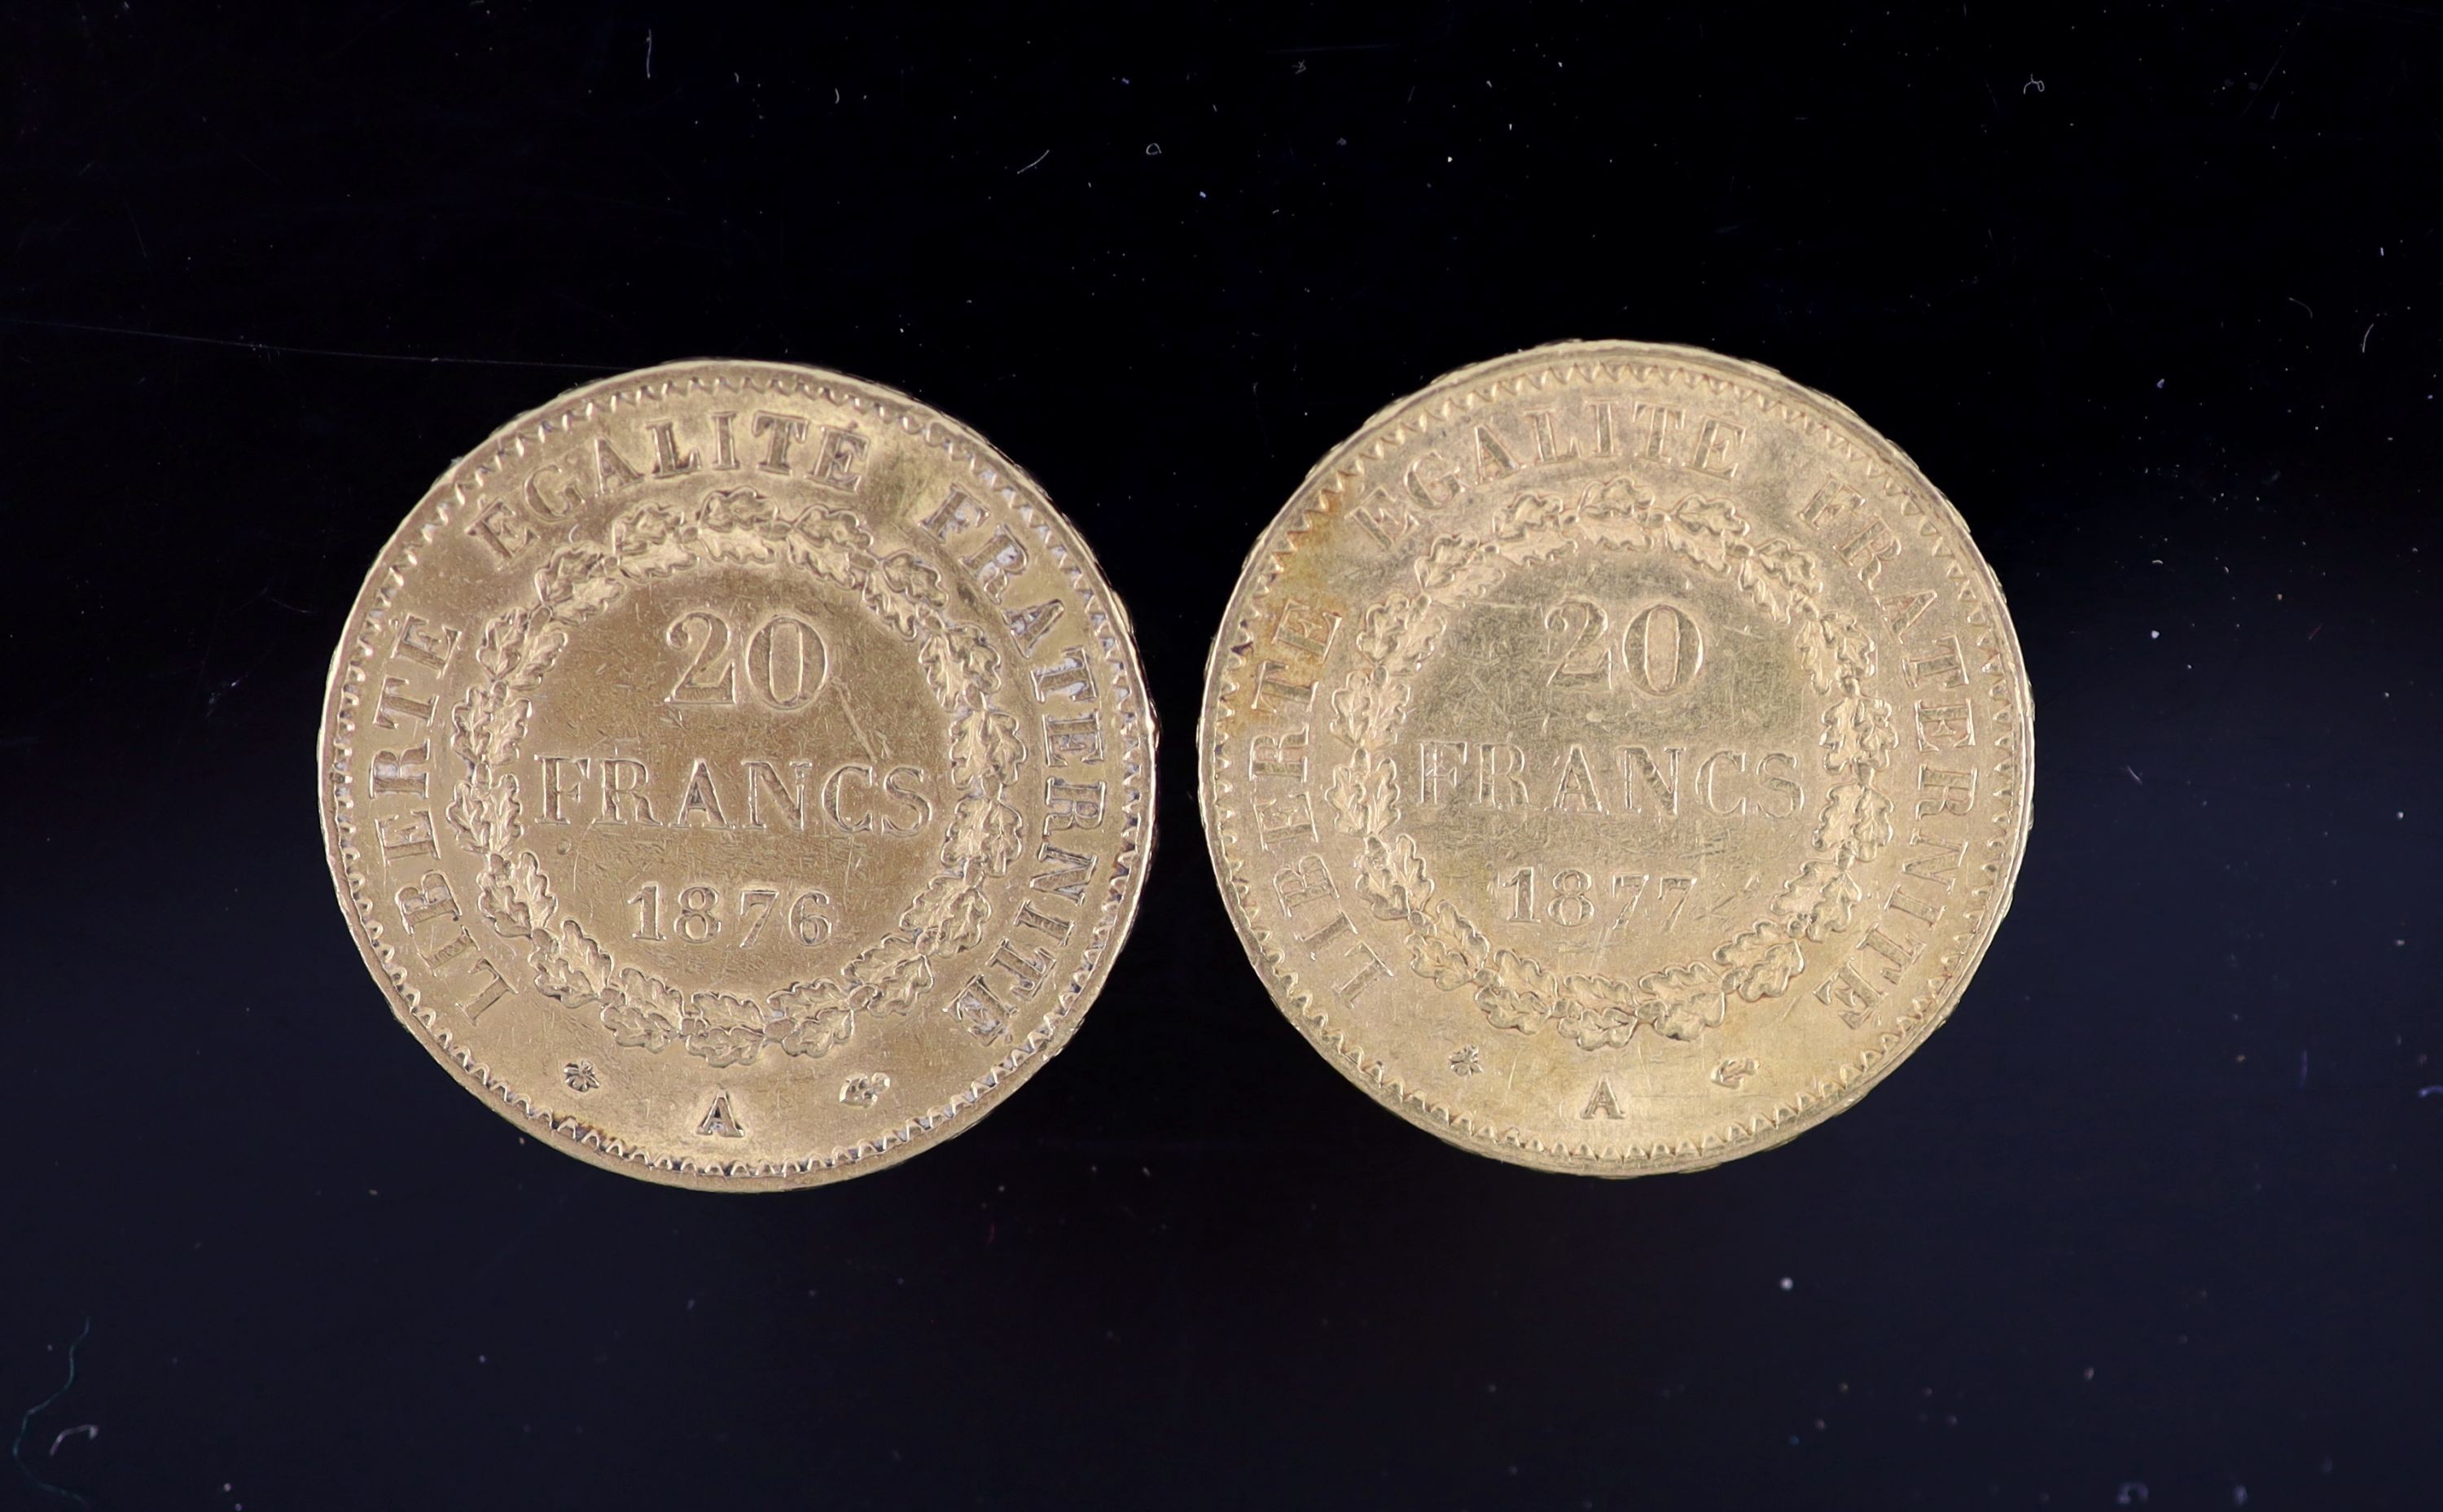 France coins, two gold 20 francs, 1876A, VF and 1877A, VF